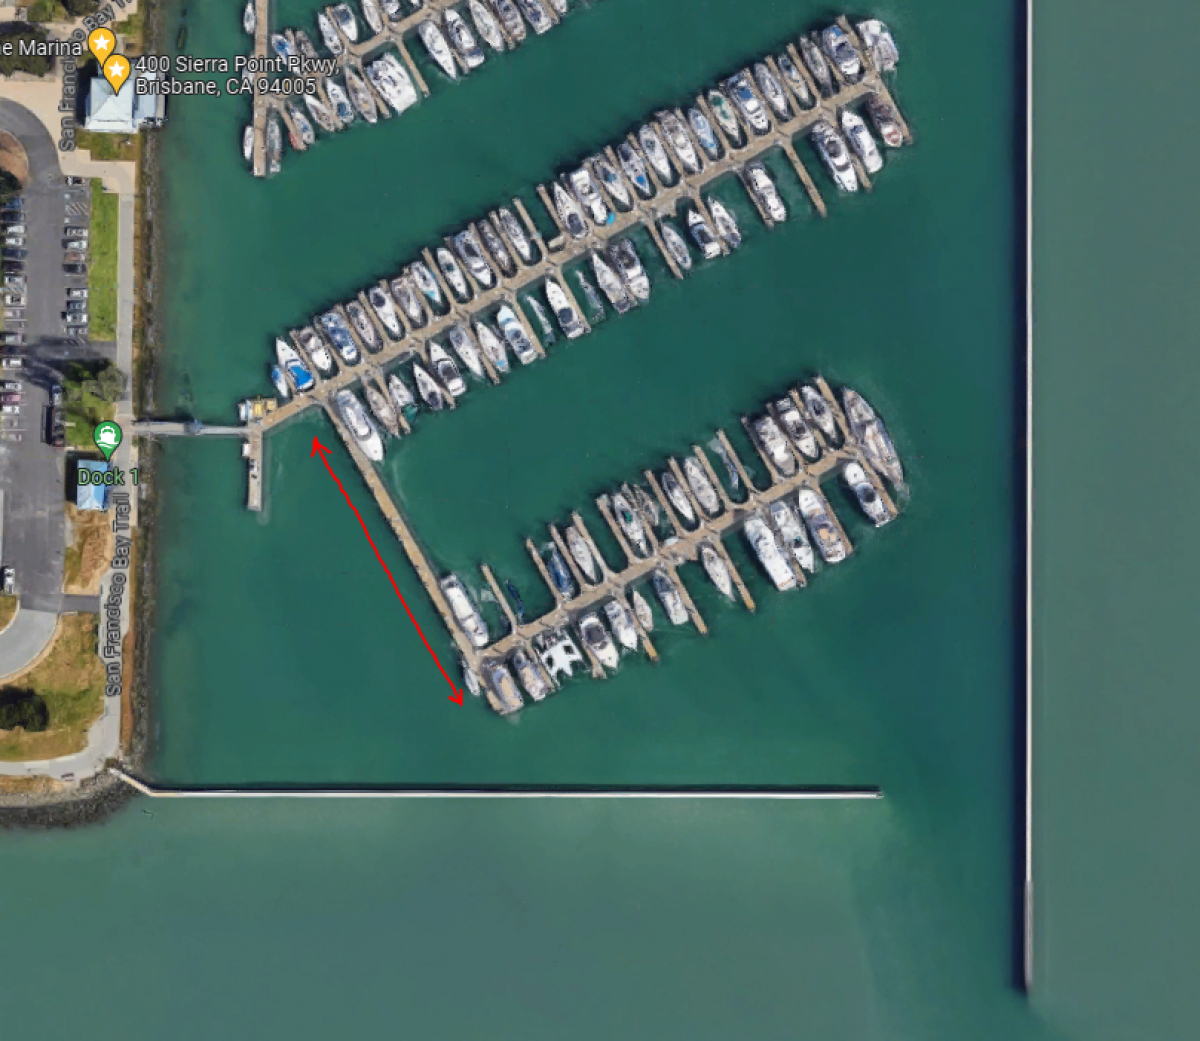 View of guest dock from Google maps